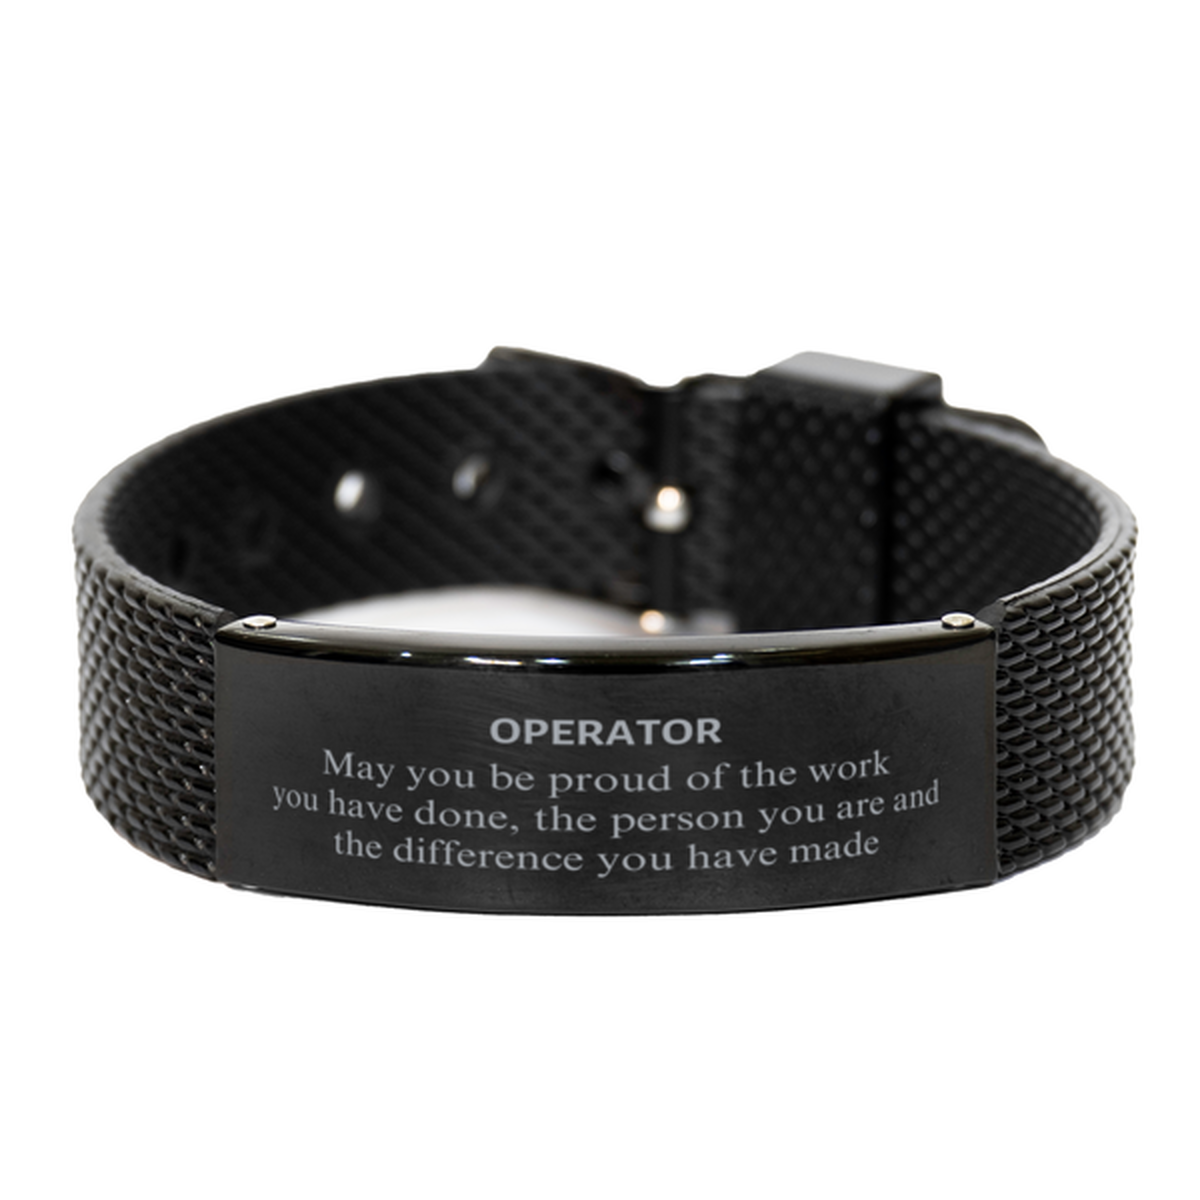 Operator May you be proud of the work you have done, Retirement Operator Black Shark Mesh Bracelet for Colleague Appreciation Gifts Amazing for Operator